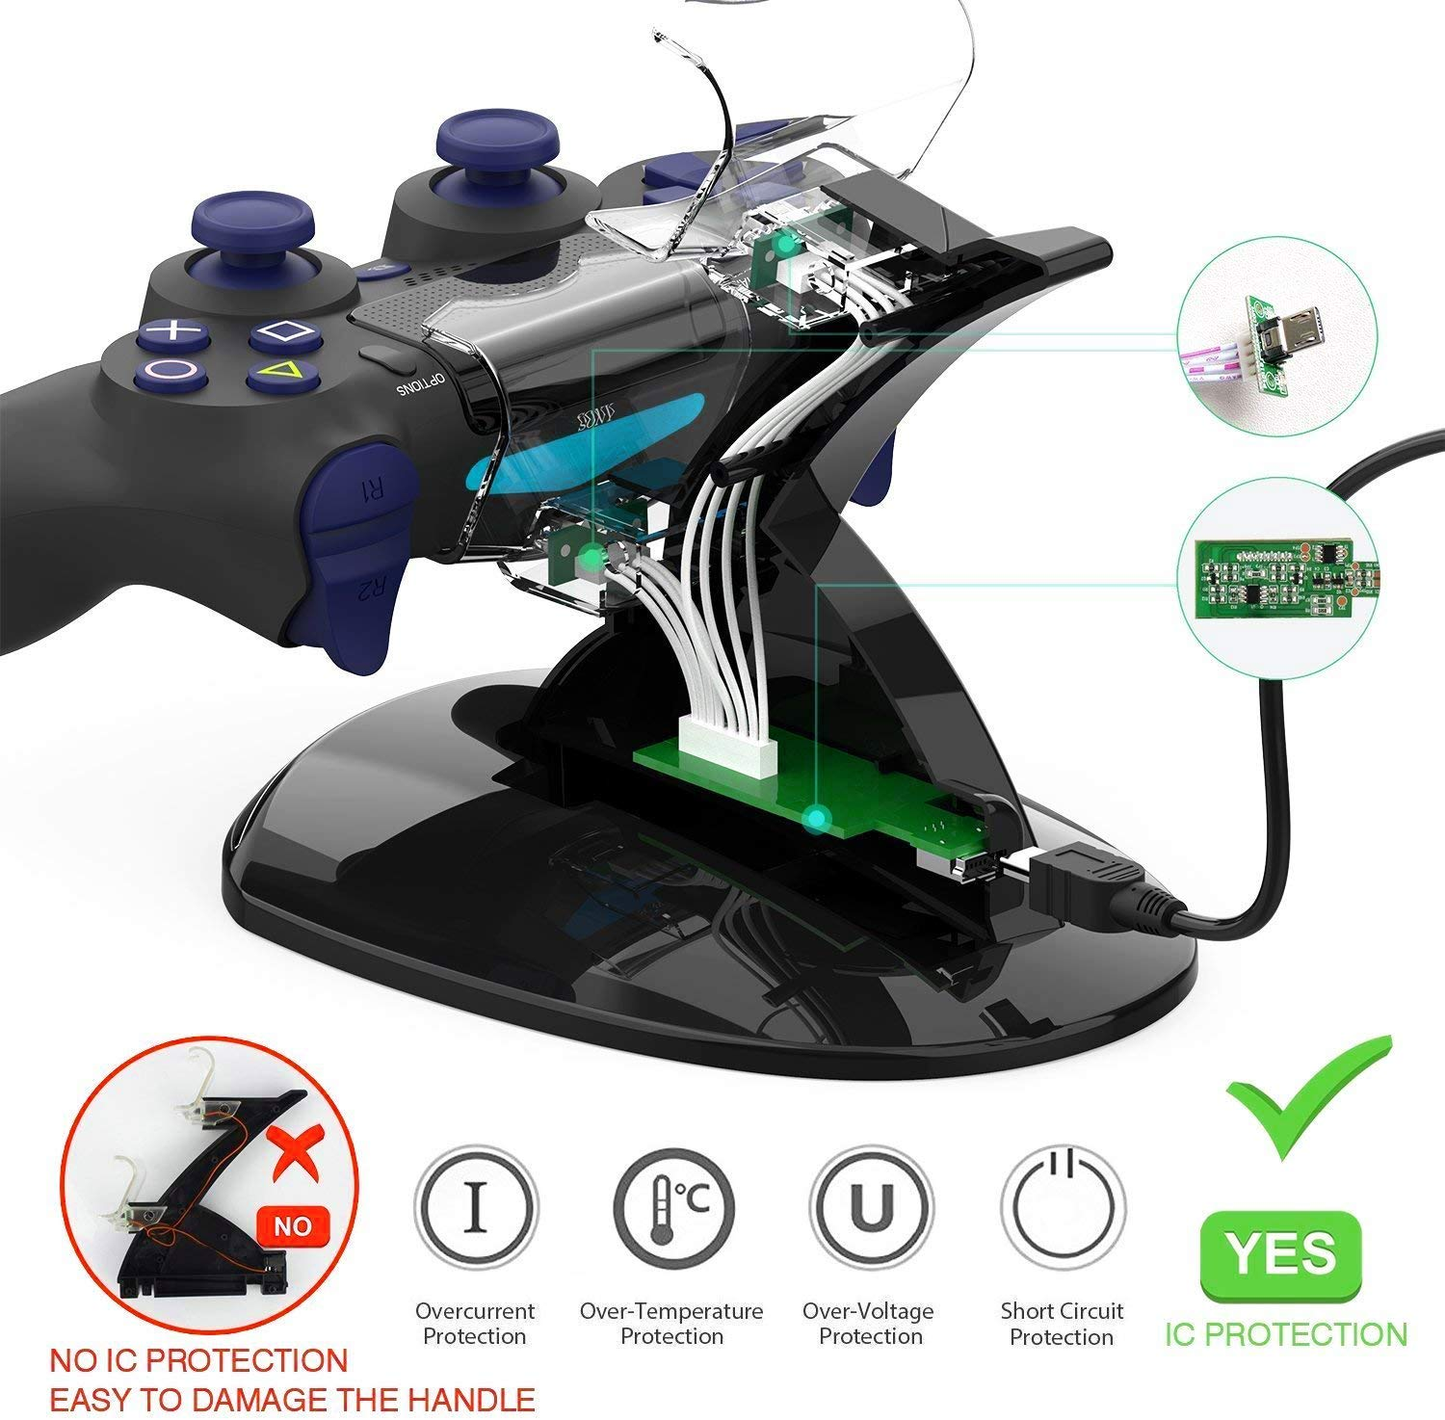 Playstation4 Regular Slim Pro Controller Charger, SUNKY LED Gaming Console Charging Stand USB Dock Station Mount Cradle for Sony PS4